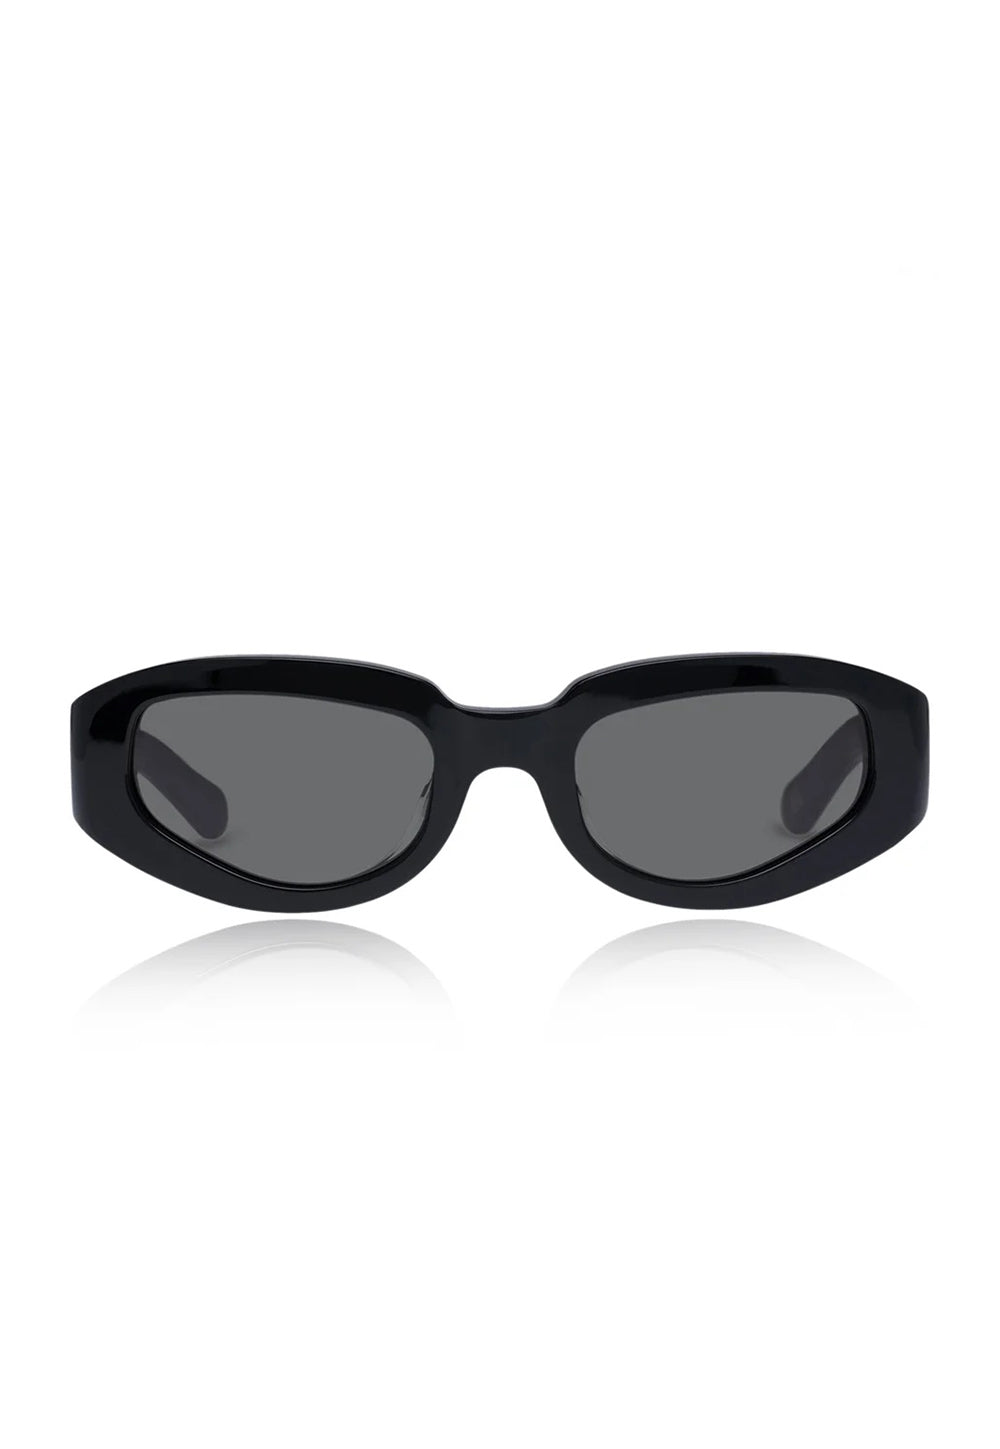 Rally Sunglasses - Black sold by Angel Divine